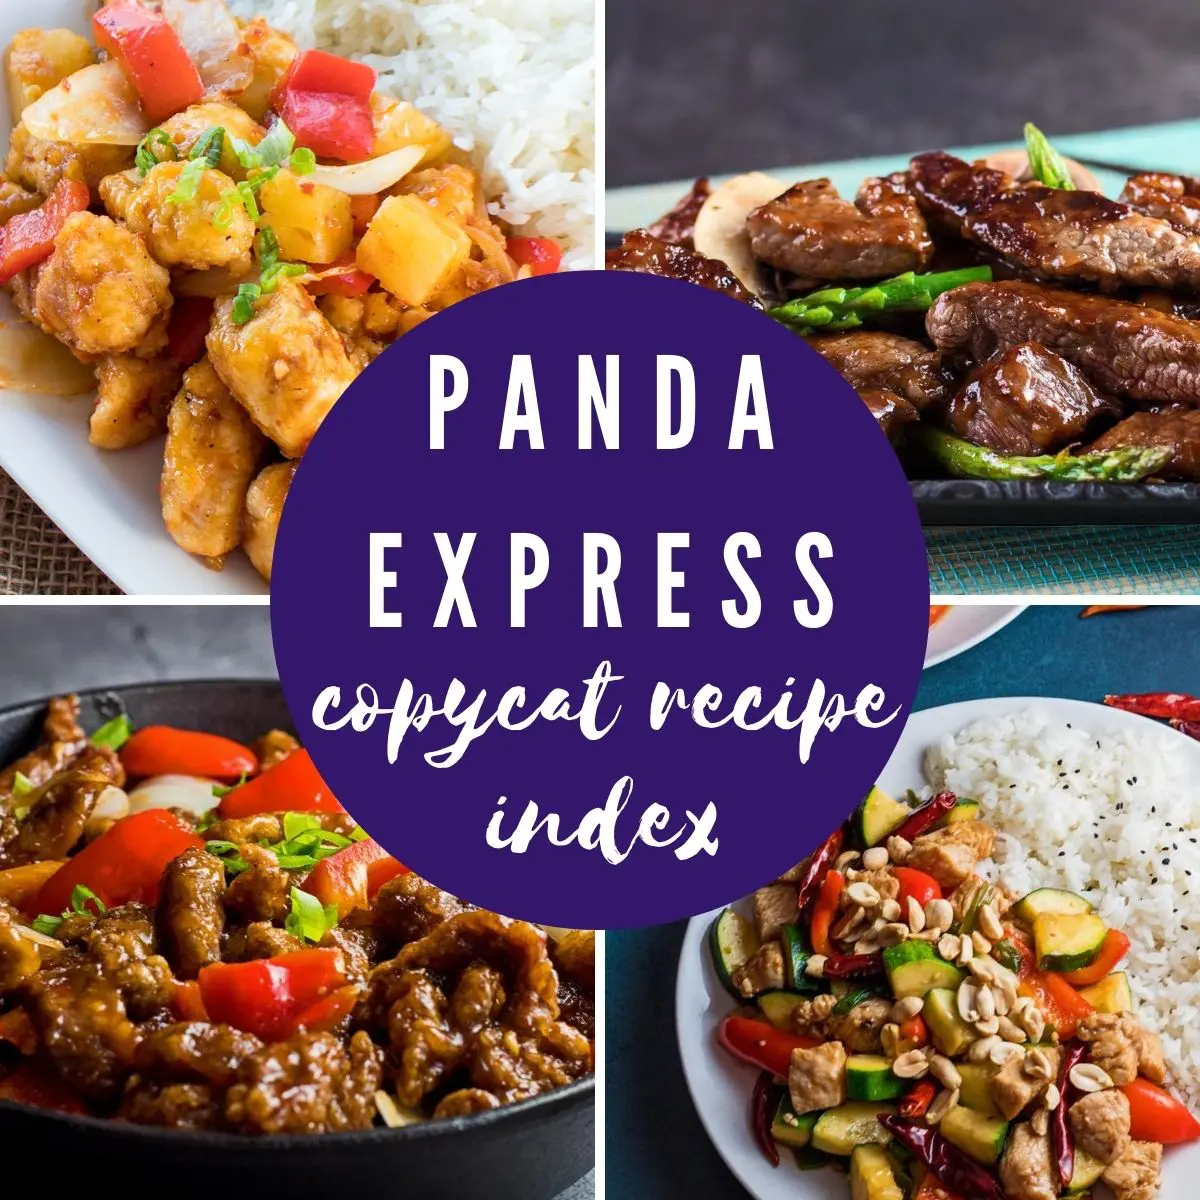 Collage of four panda express recipe images with a transparent brick red overlay for text title 'Panda Express copycat recipe index'.